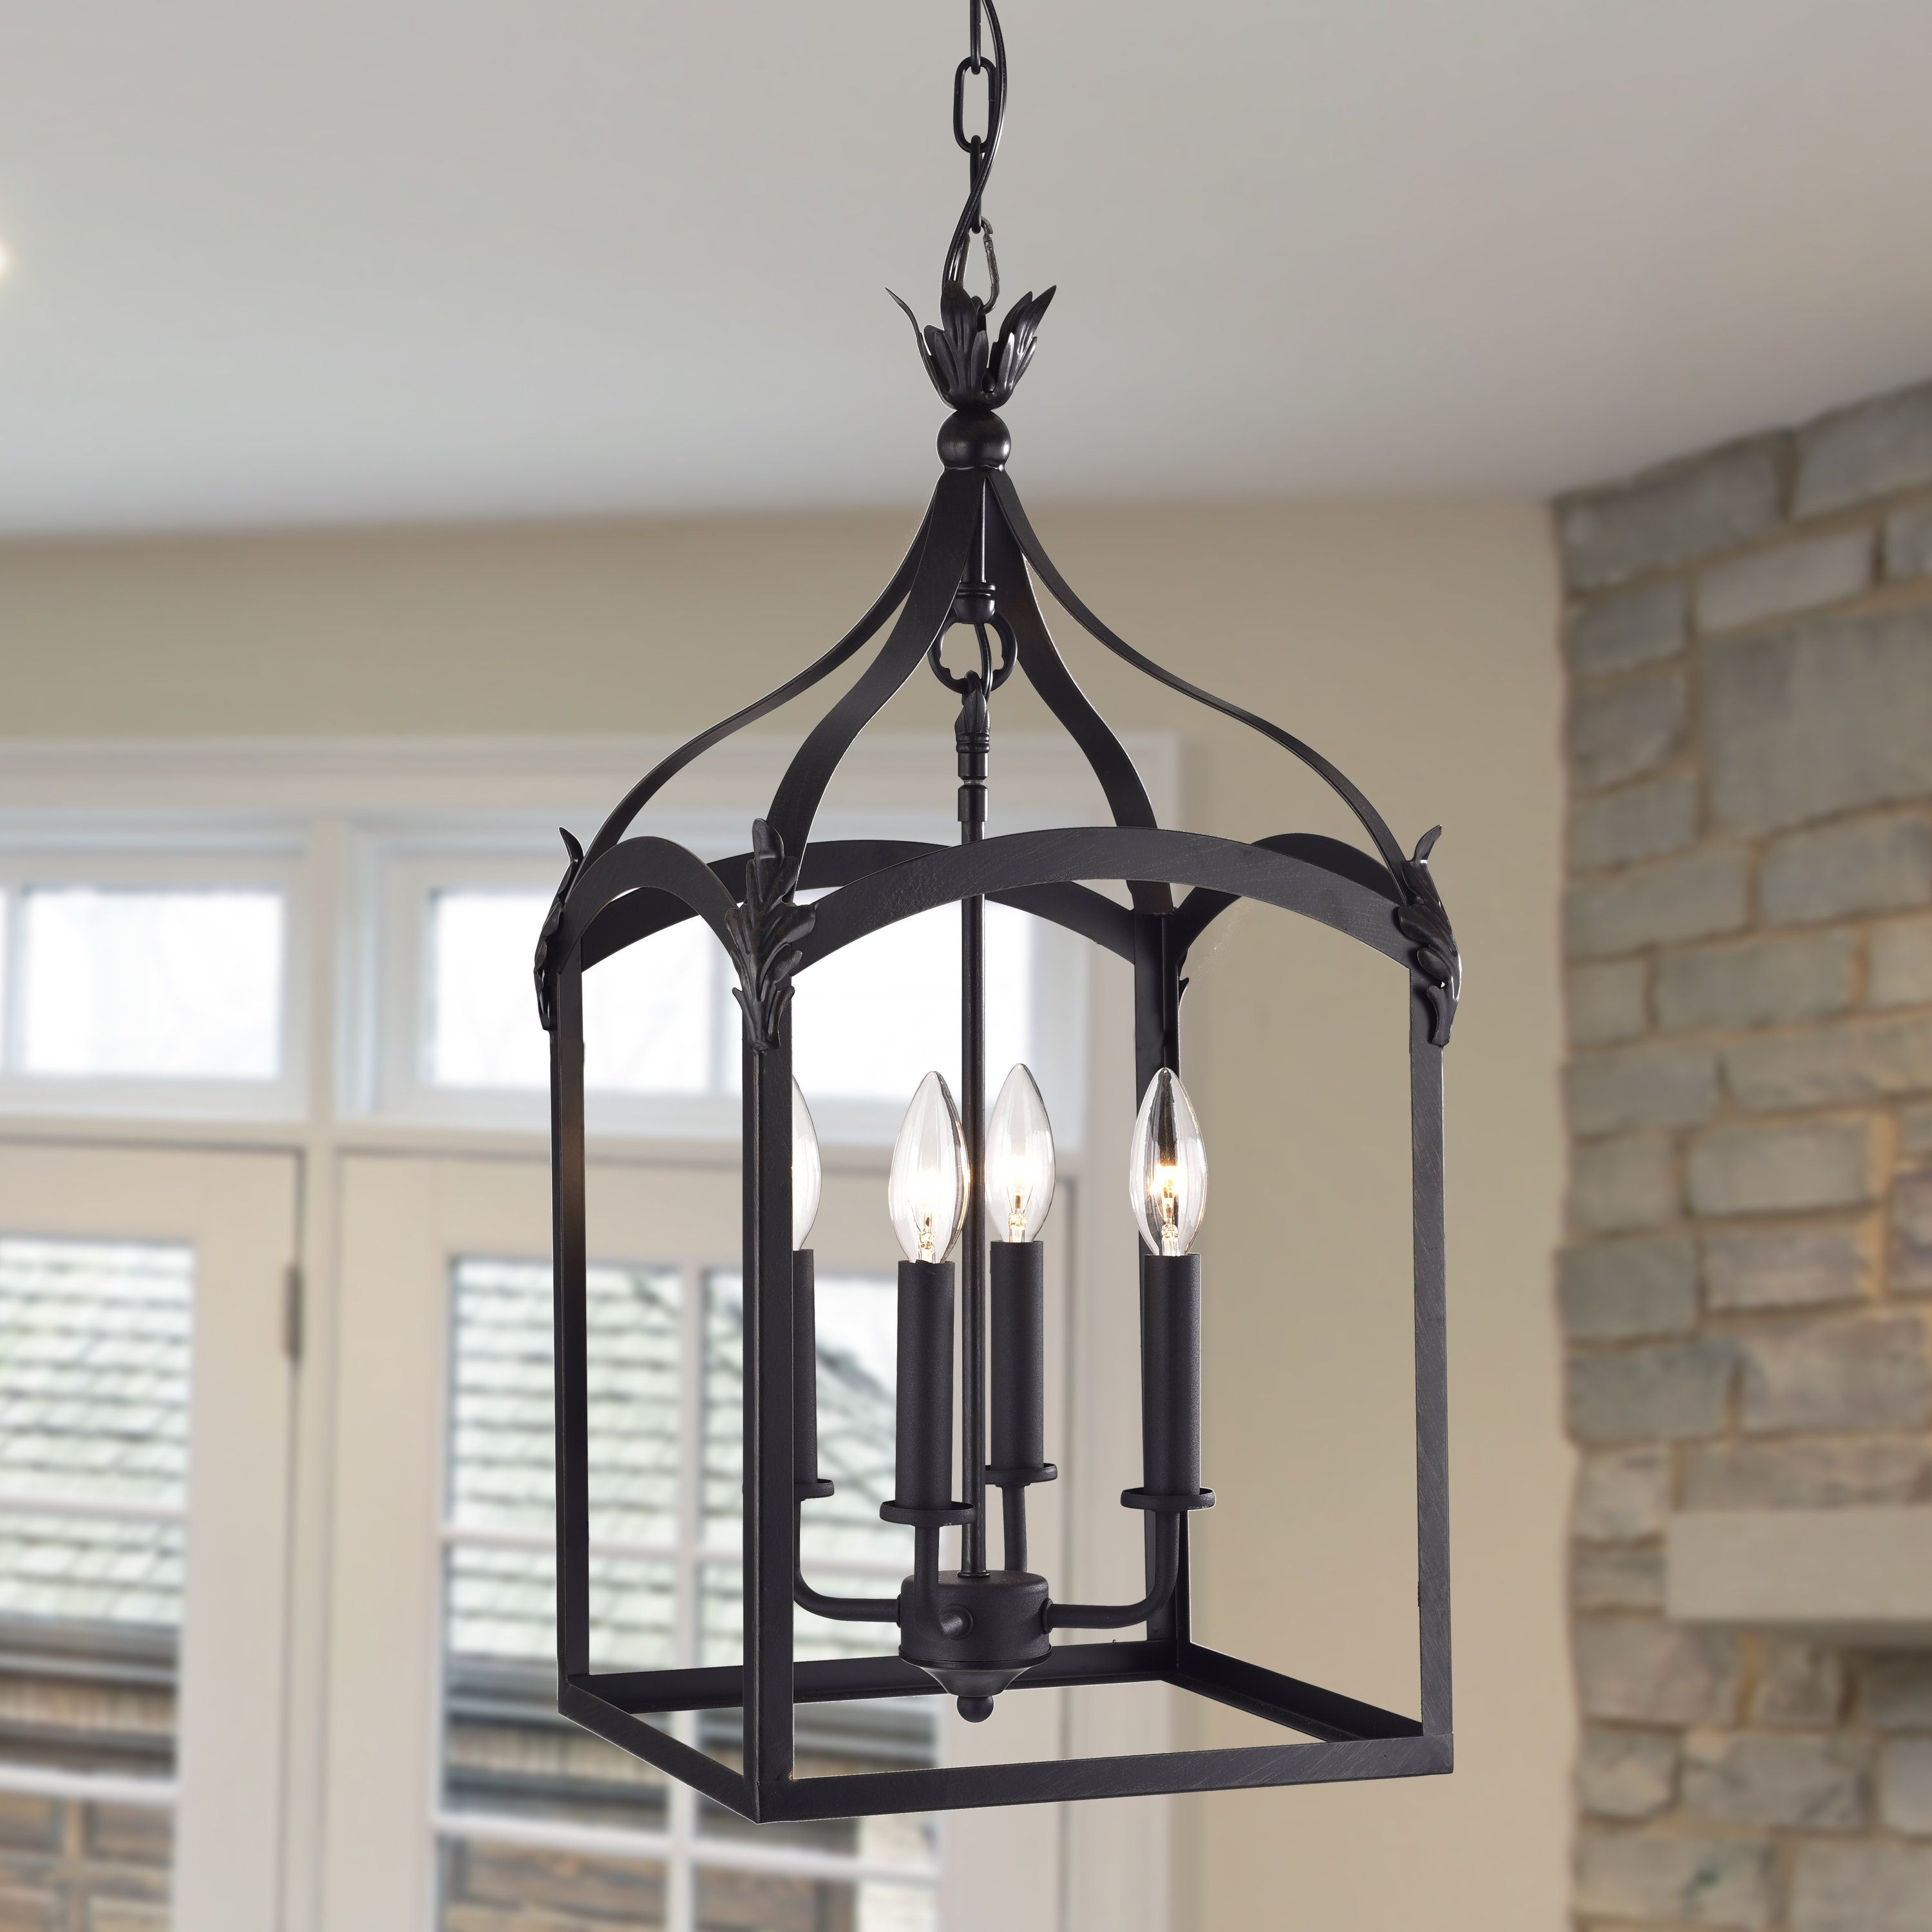 Darby Home Co Forsyth 4 Light Lantern Geometric Pendant With Nisbet 6 Light Lantern Geometric Pendants (View 9 of 30)